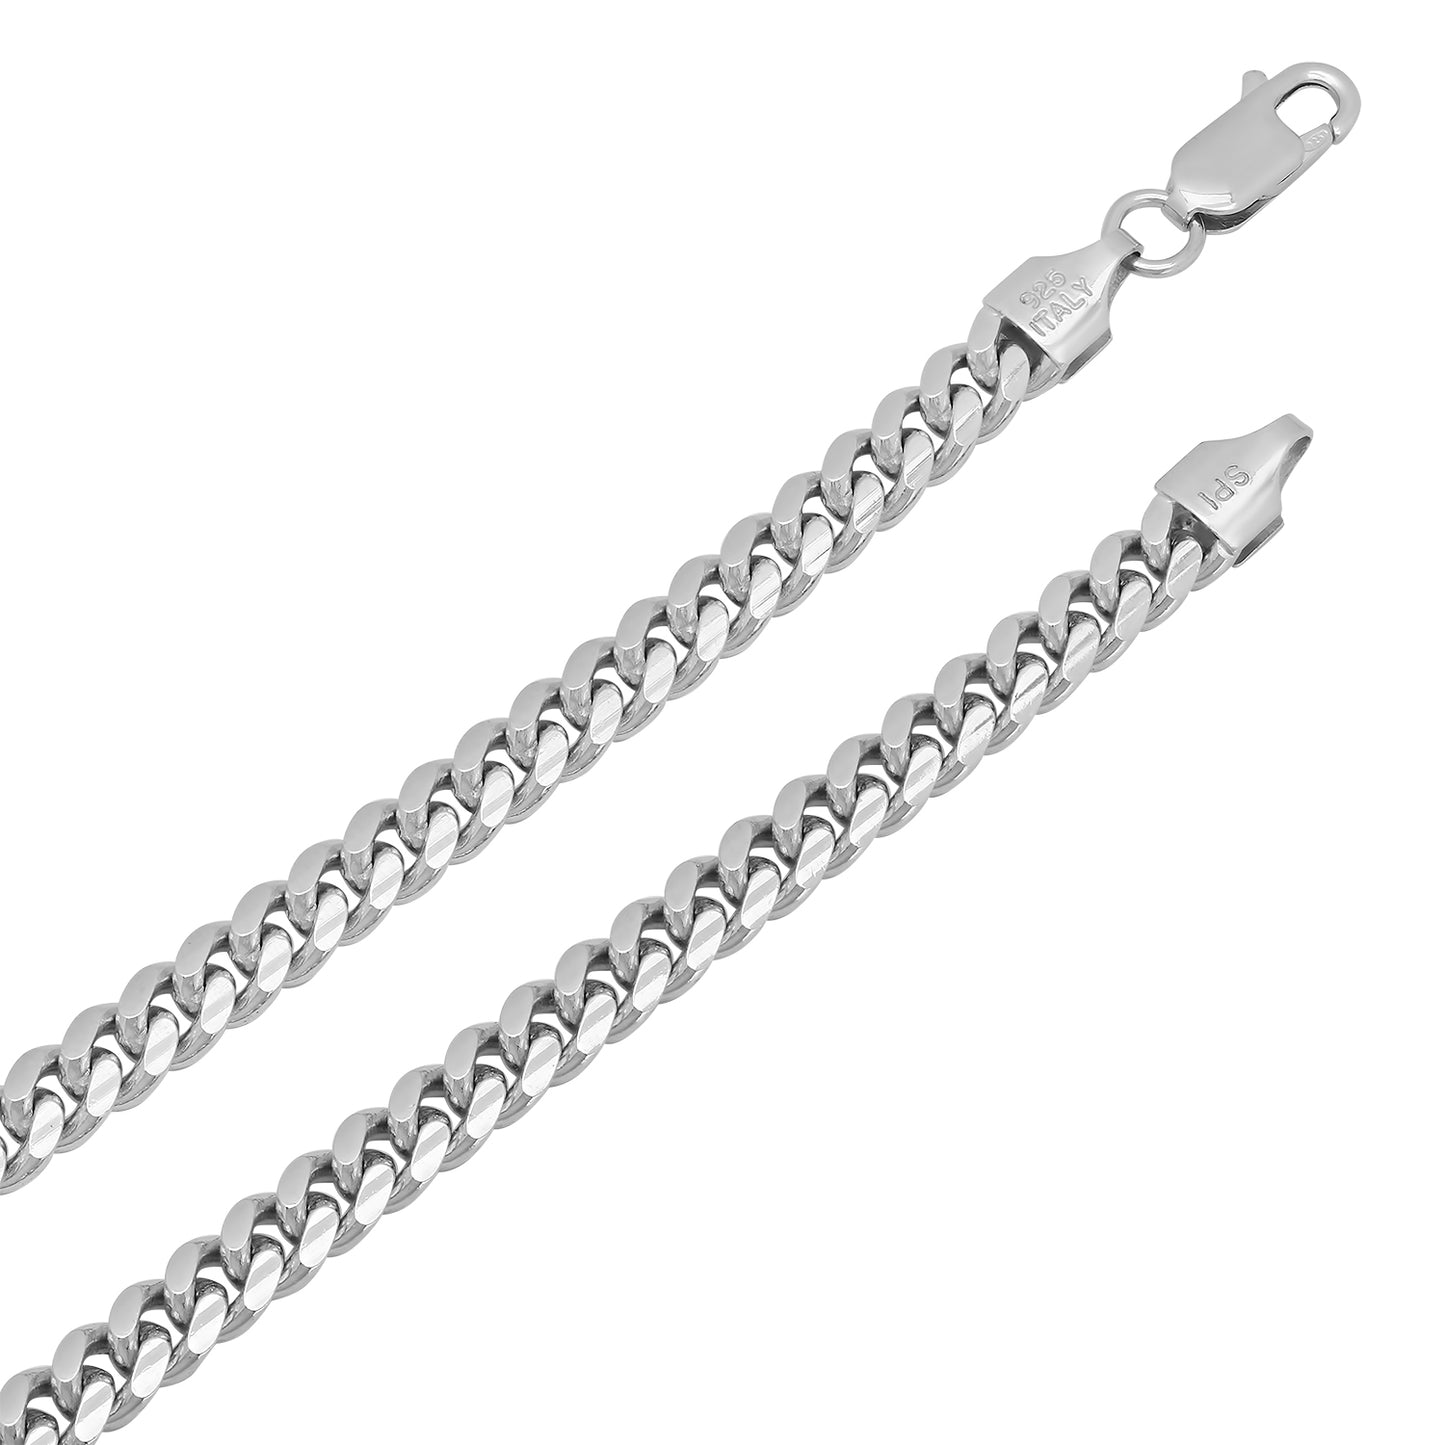 4.8mm Polished Rhodium Plated Silver Flat Miami Cuban Link Chain Necklace (SKU: SS-NK1027)